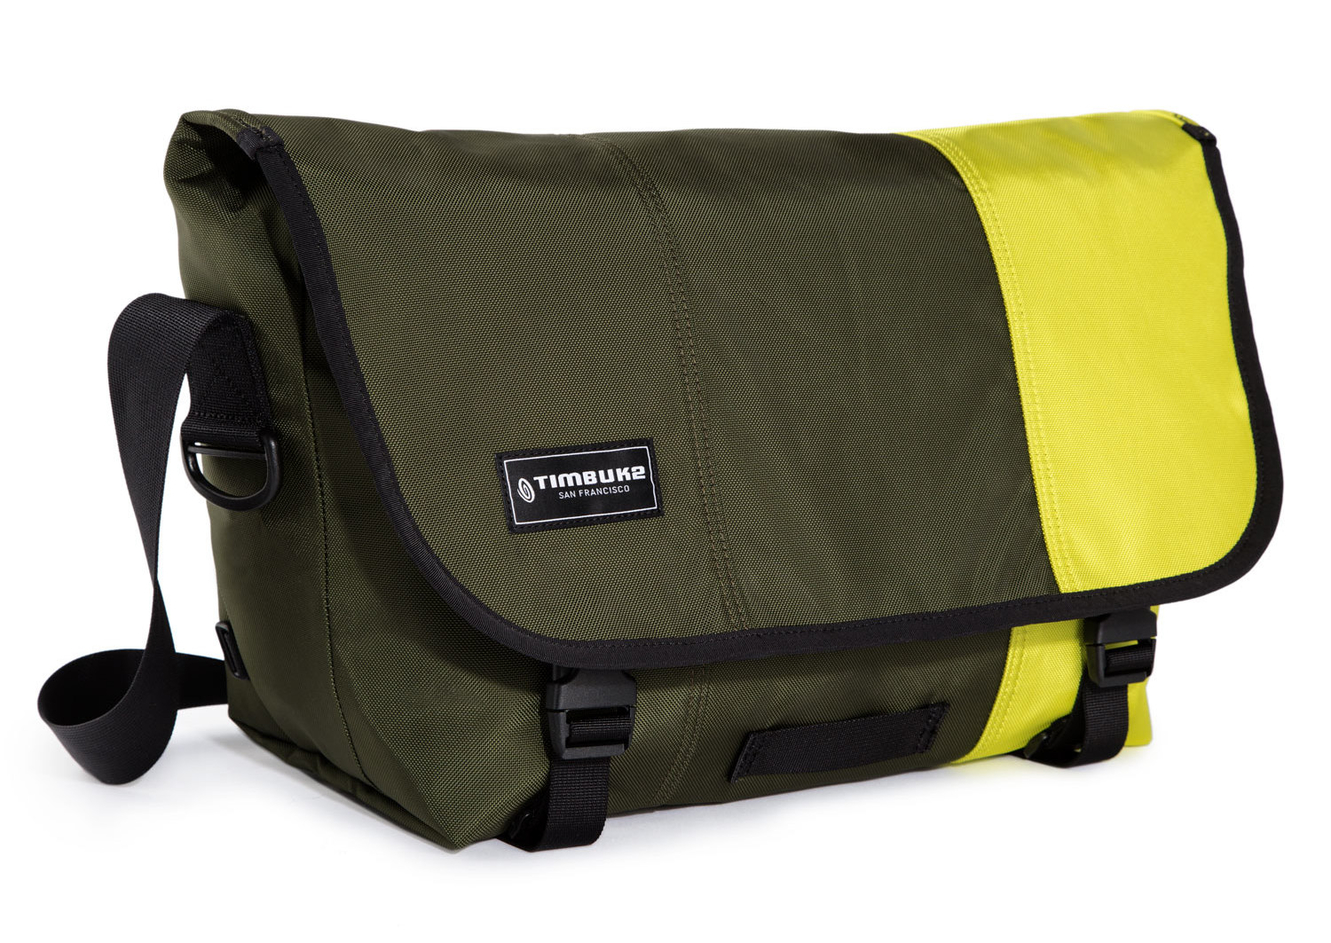 Hello! I was gifted this TimBuk2 flight messenger bag. I love the size and  pocket space, but not sure about the color. Part of me feels like the  yellow buckles look a